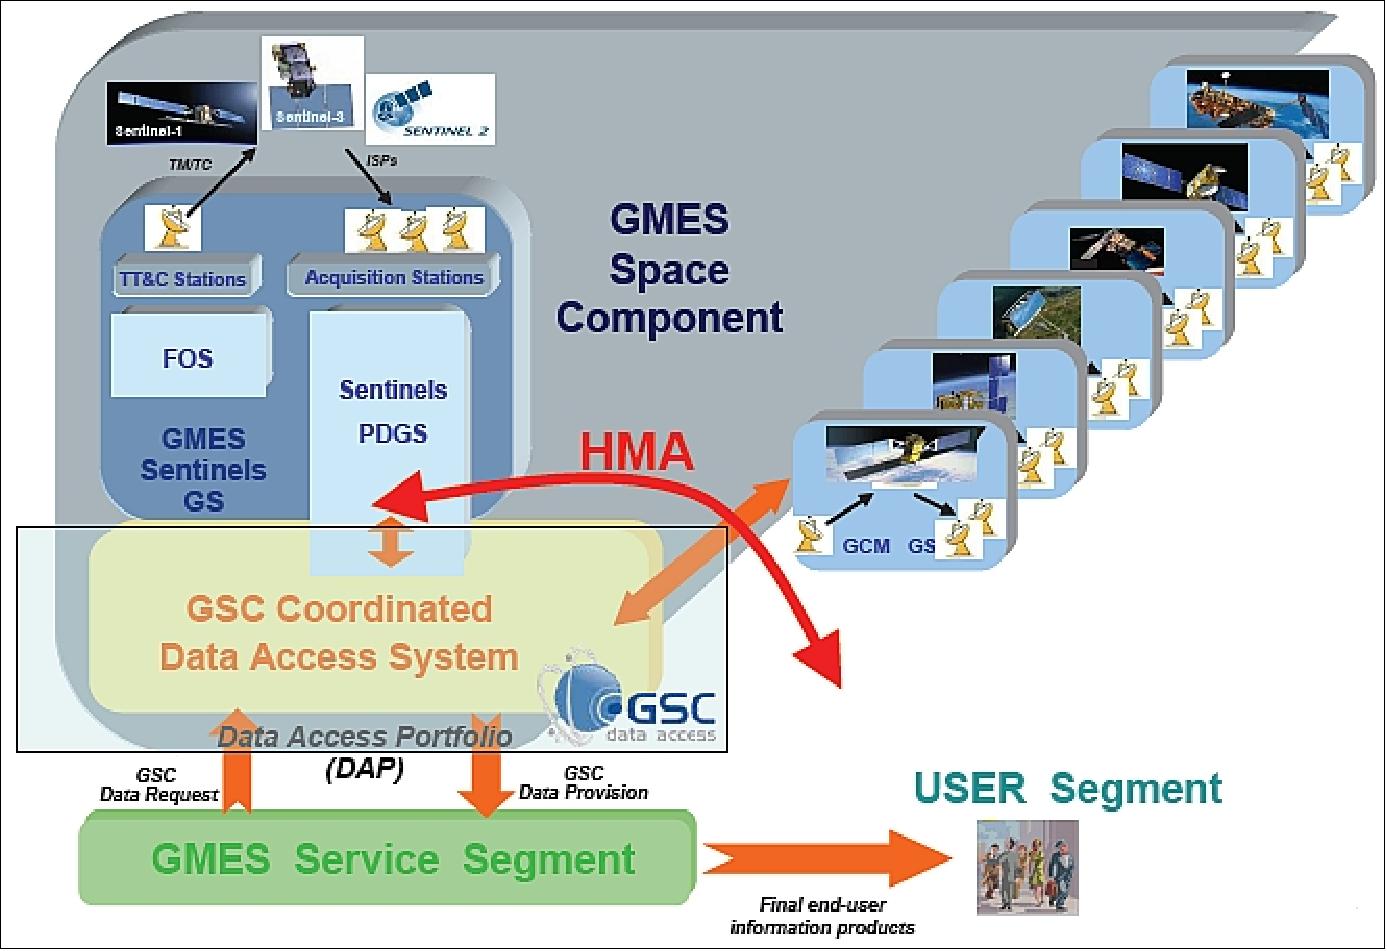 Figure 23: Overview of the GSC and HMA (image credit: ESA)